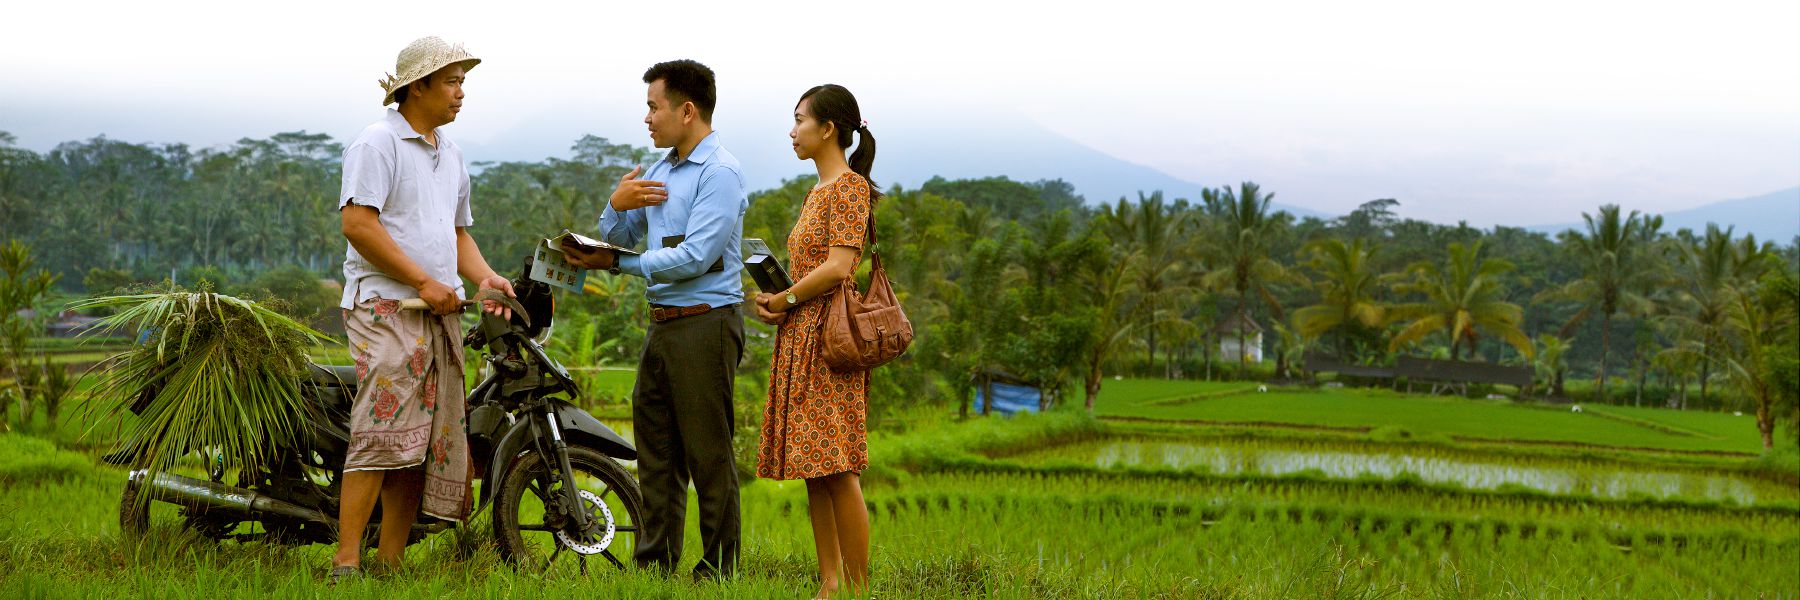 Two of Jehovah's Witnesses preaching to a man in a rice paddy.